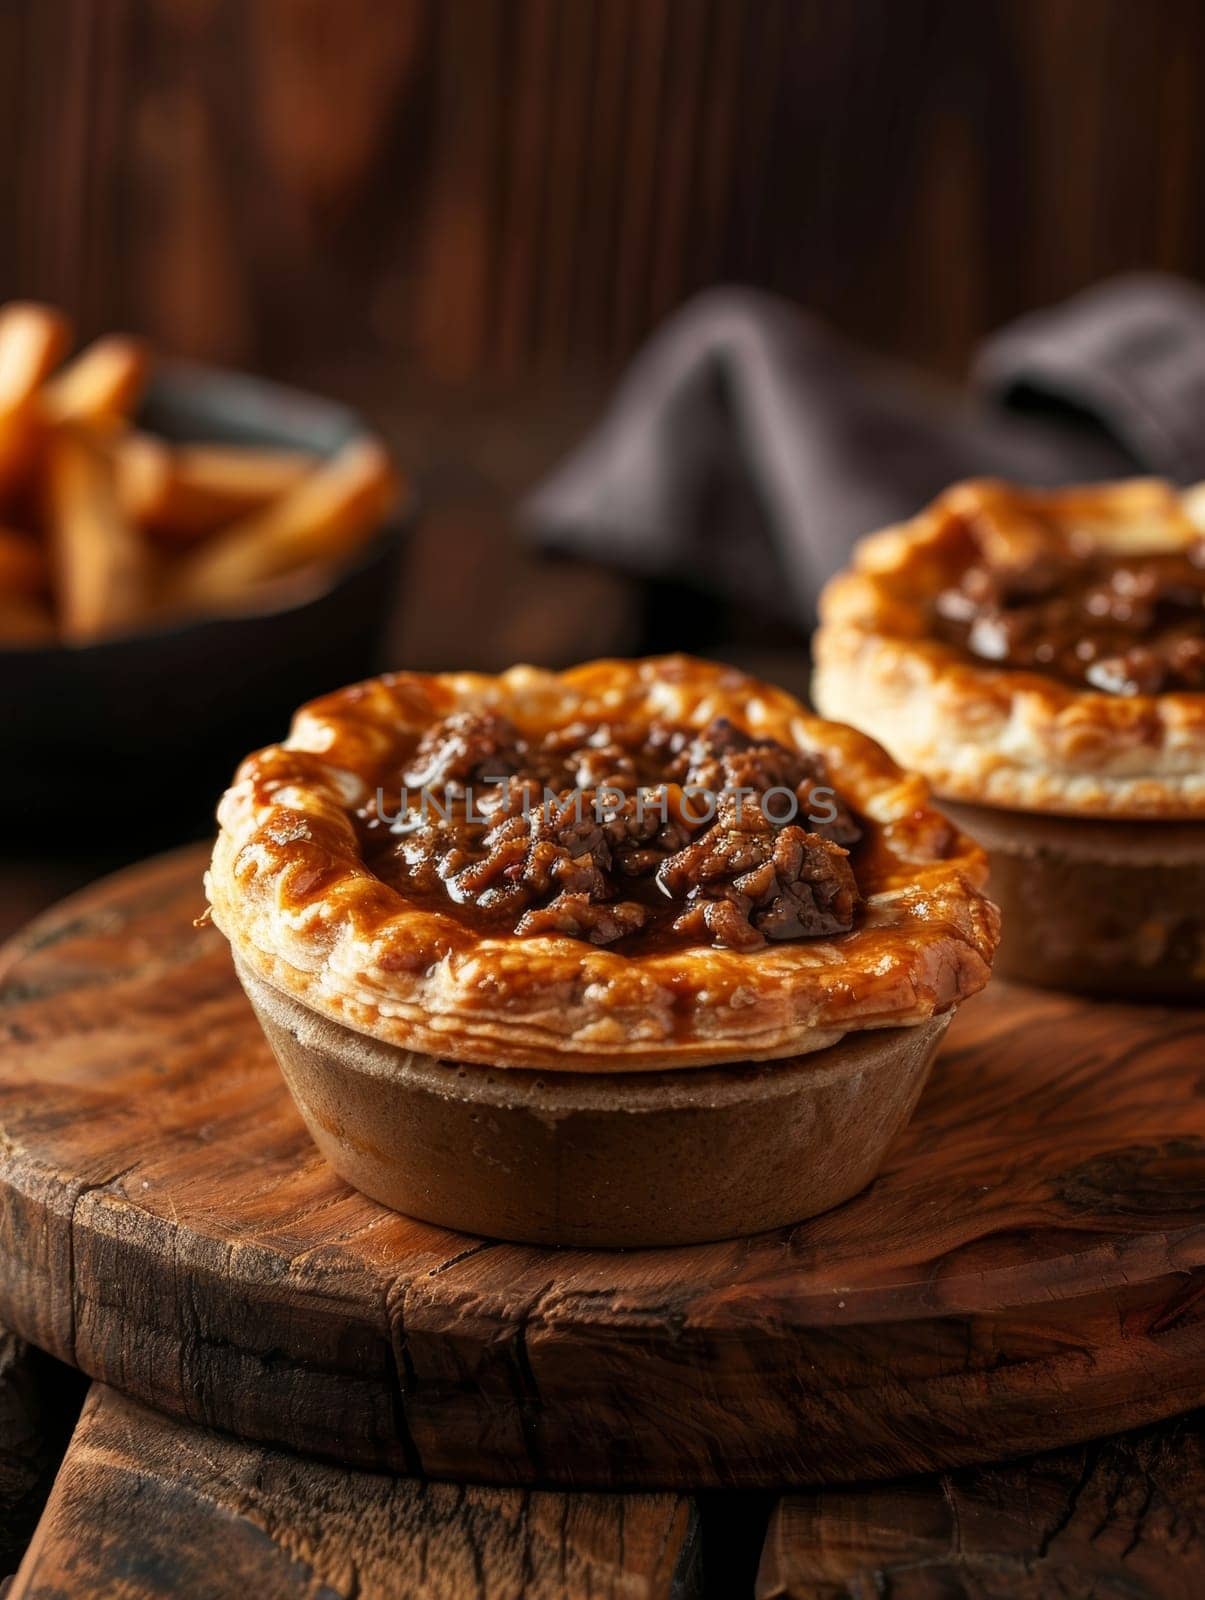 Delicious Australian meat pie with a flaky golden crust, filled with savory minced meat and rich gravy, served on a rustic wooden board. A classic comfort food and traditional snack. by sfinks